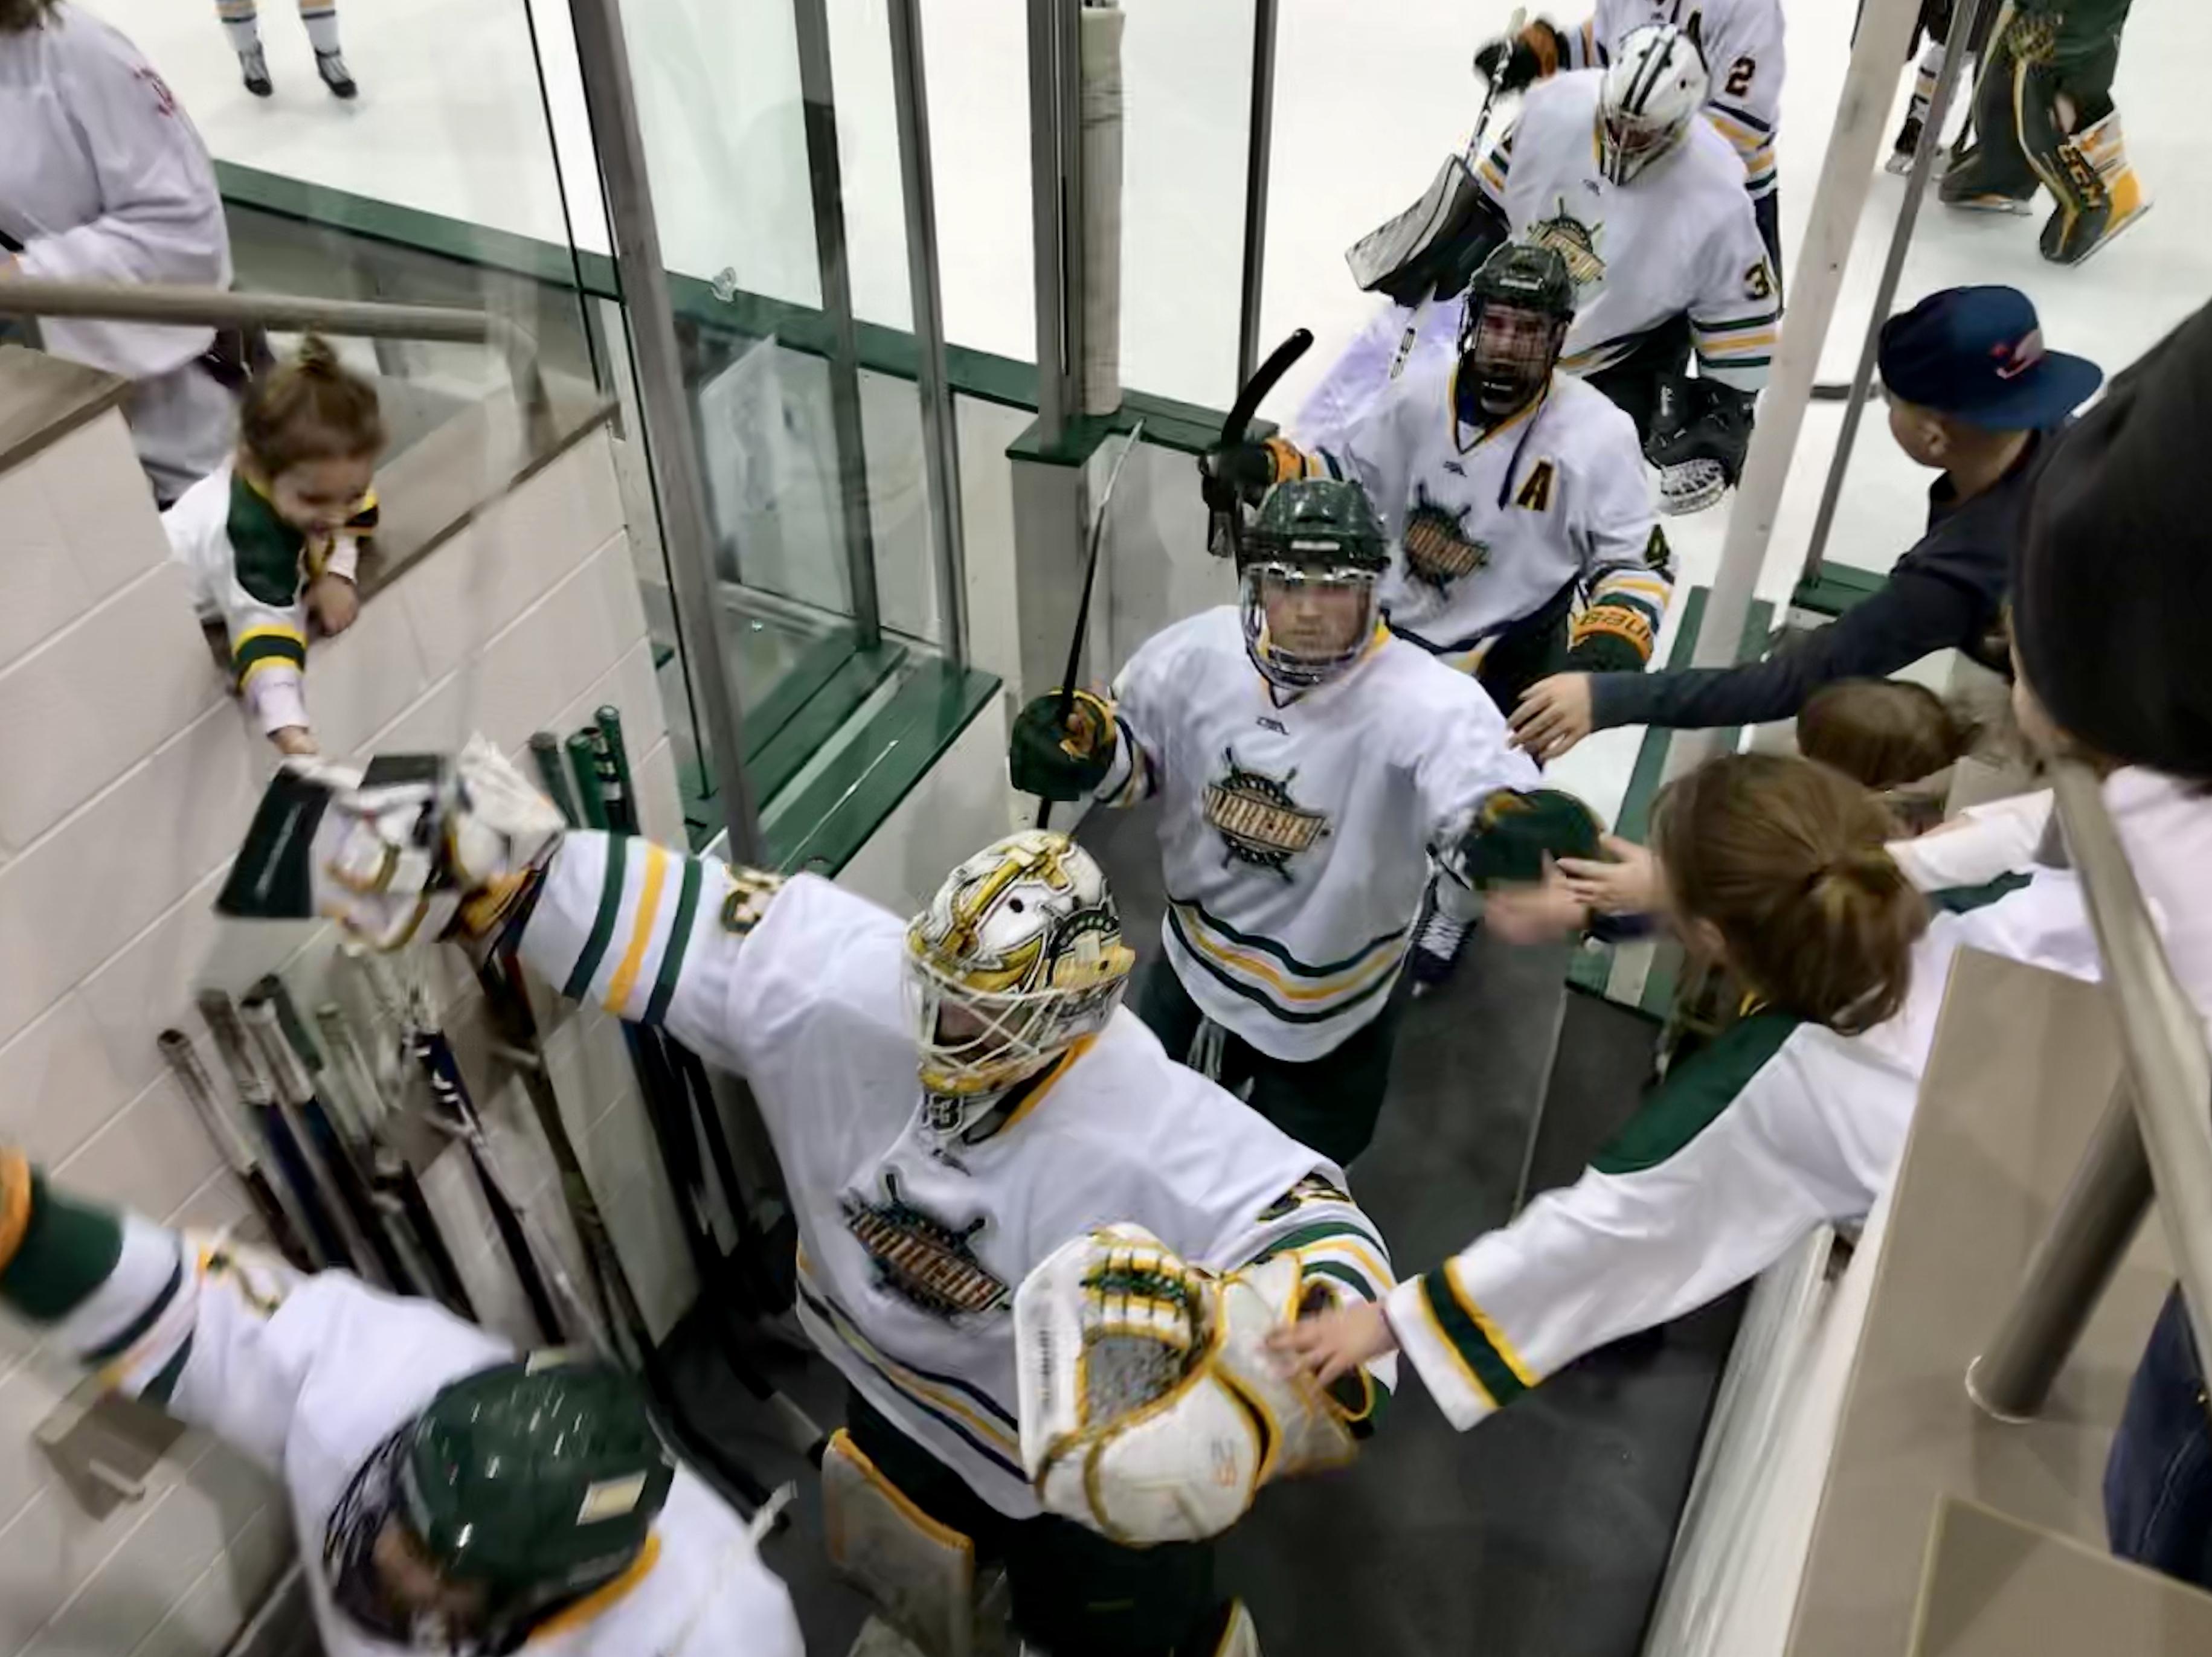 Laker sweep! Hockey teams win, advance to conference